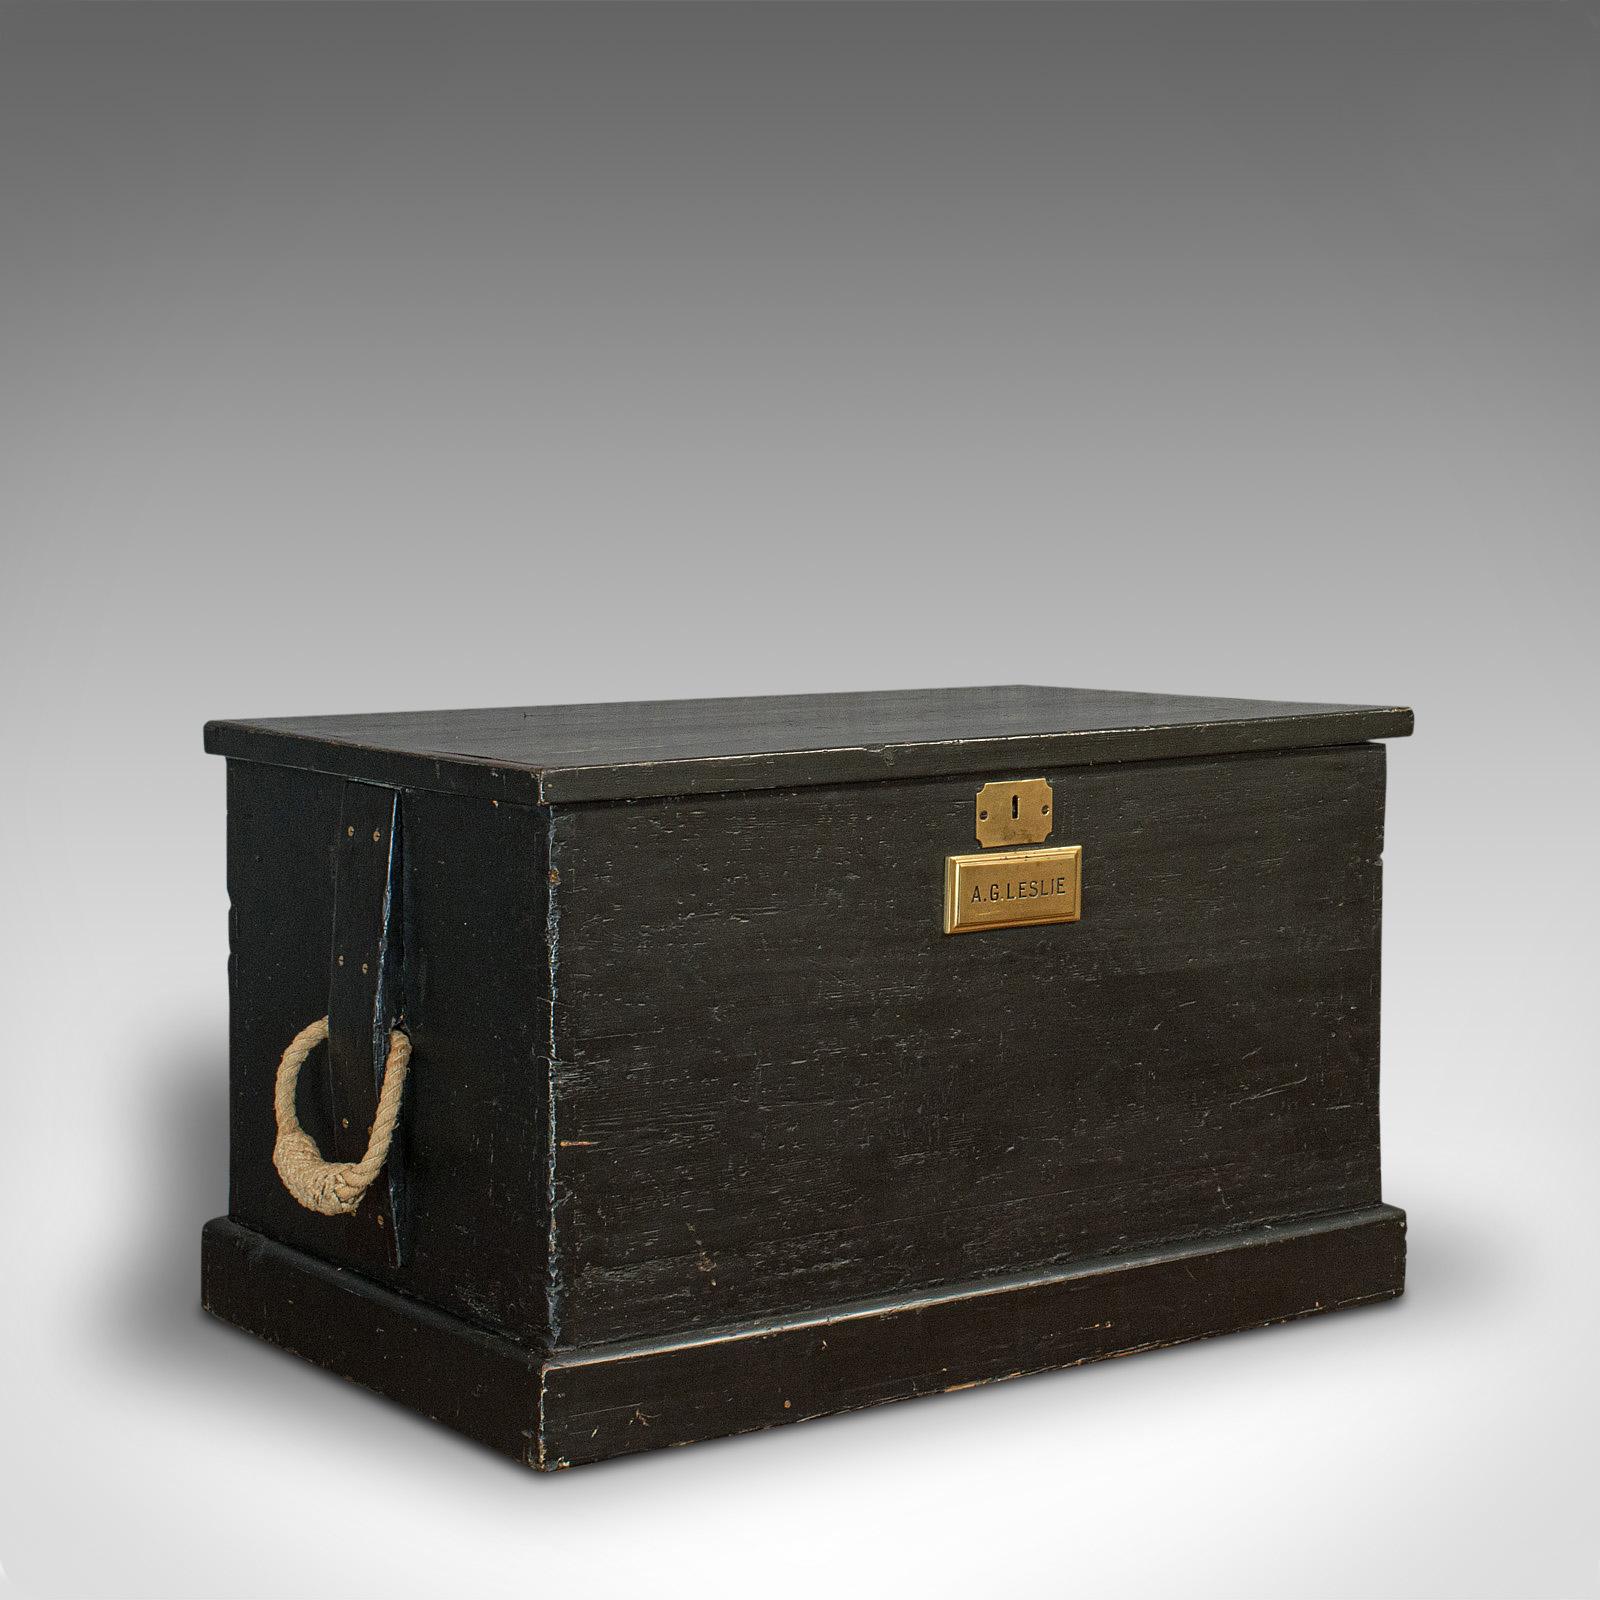 This is an antique master shipwright's chest. An English, mahogany lined tool trunk, dating to the Victorian period, circa 1880.

Superb Victorian chest with hidden depths
Displays a desirable aged patina
Mahogany lined and showing fine grain